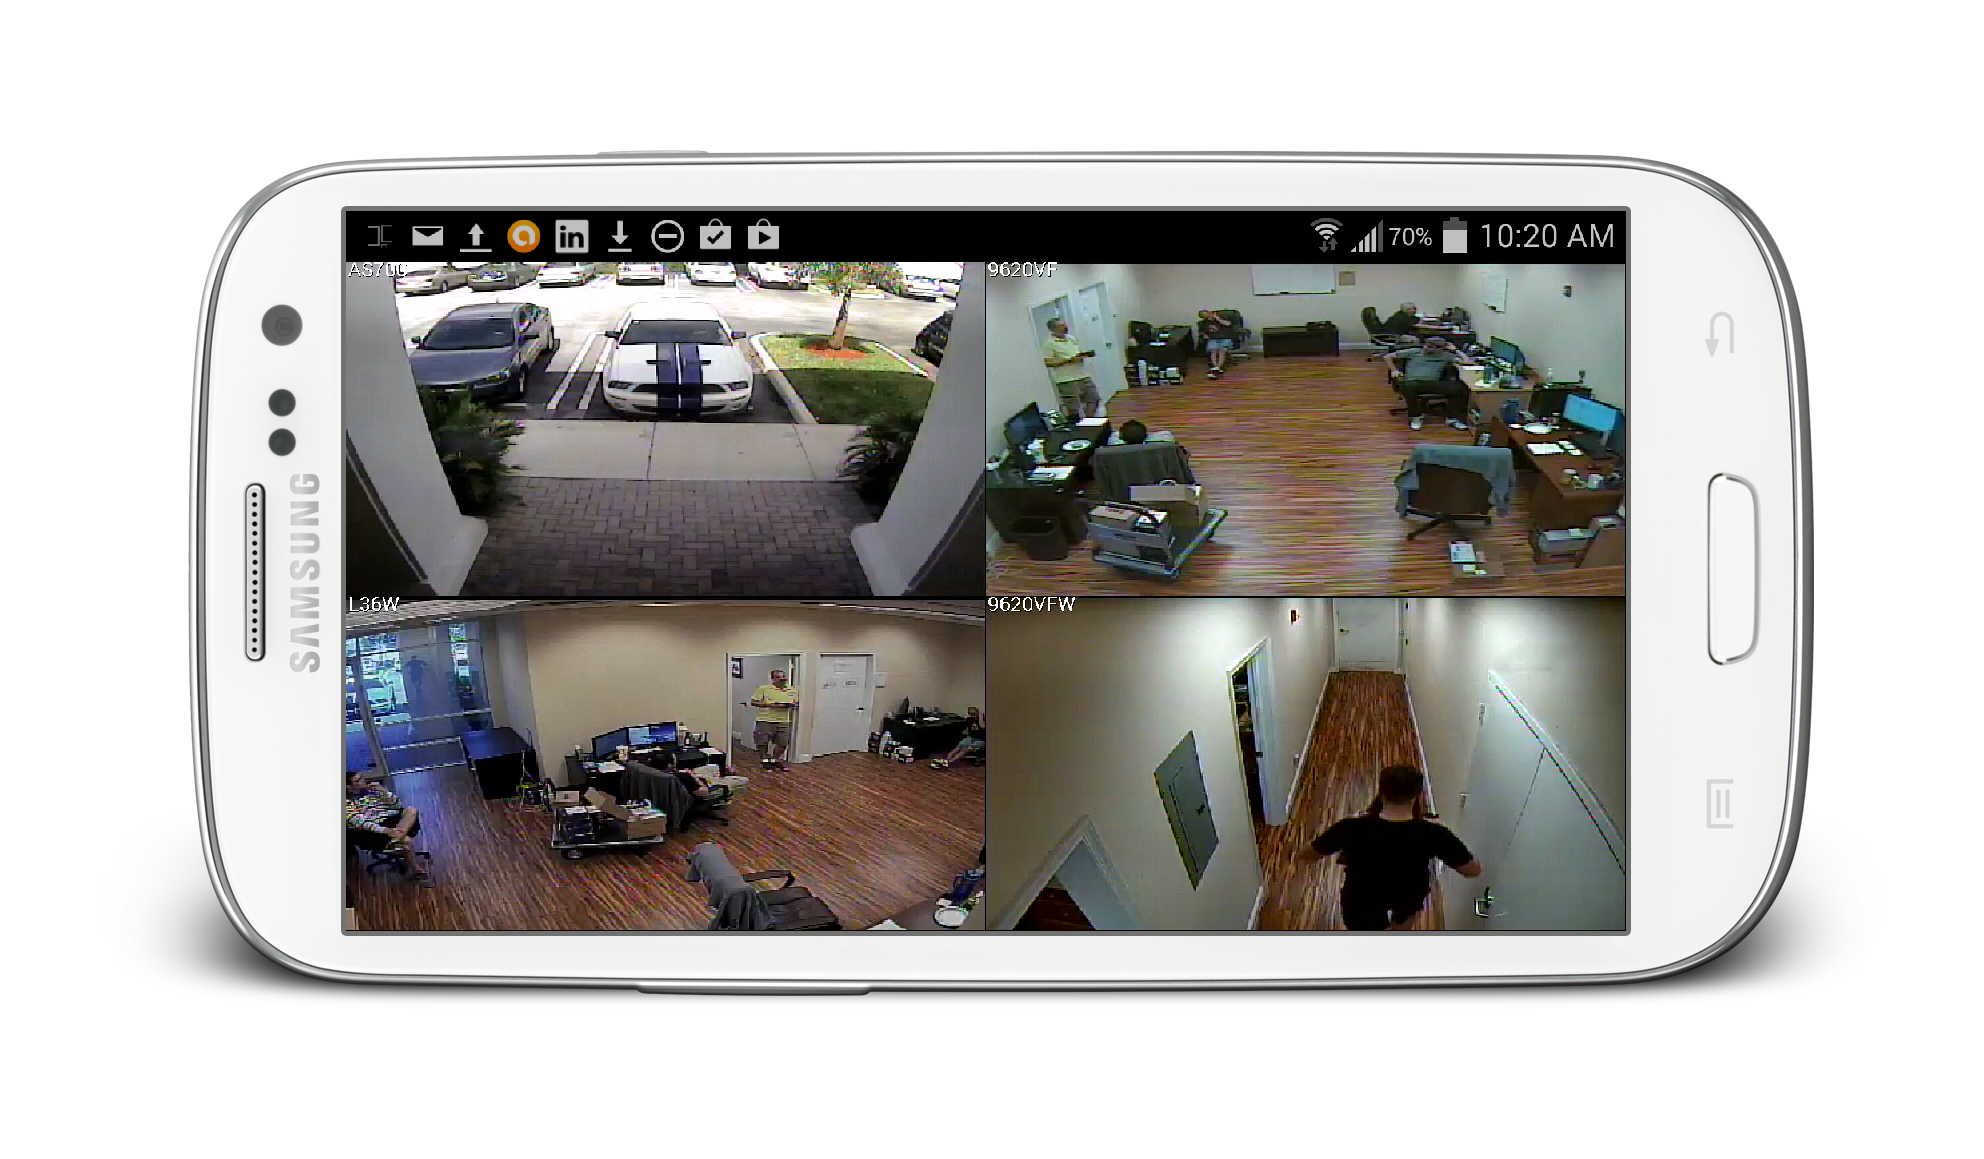 Security cams live